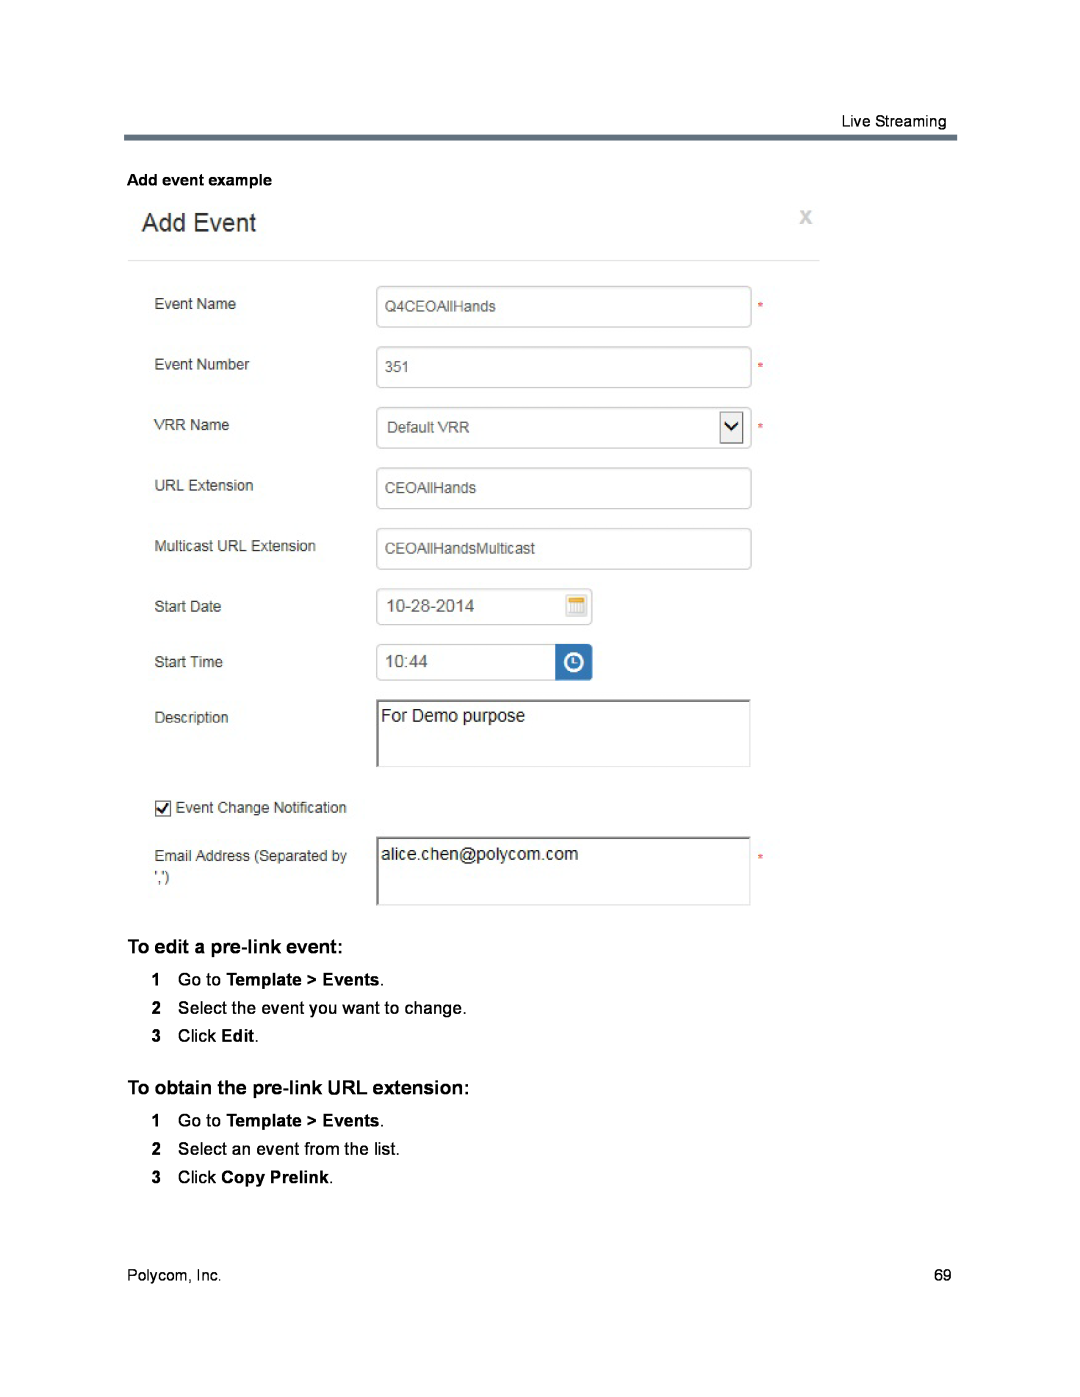 Polycom 40/0 To edit a pre-link event, To obtain the pre-link URL extension, Click Copy Prelink, Go to Template Events 